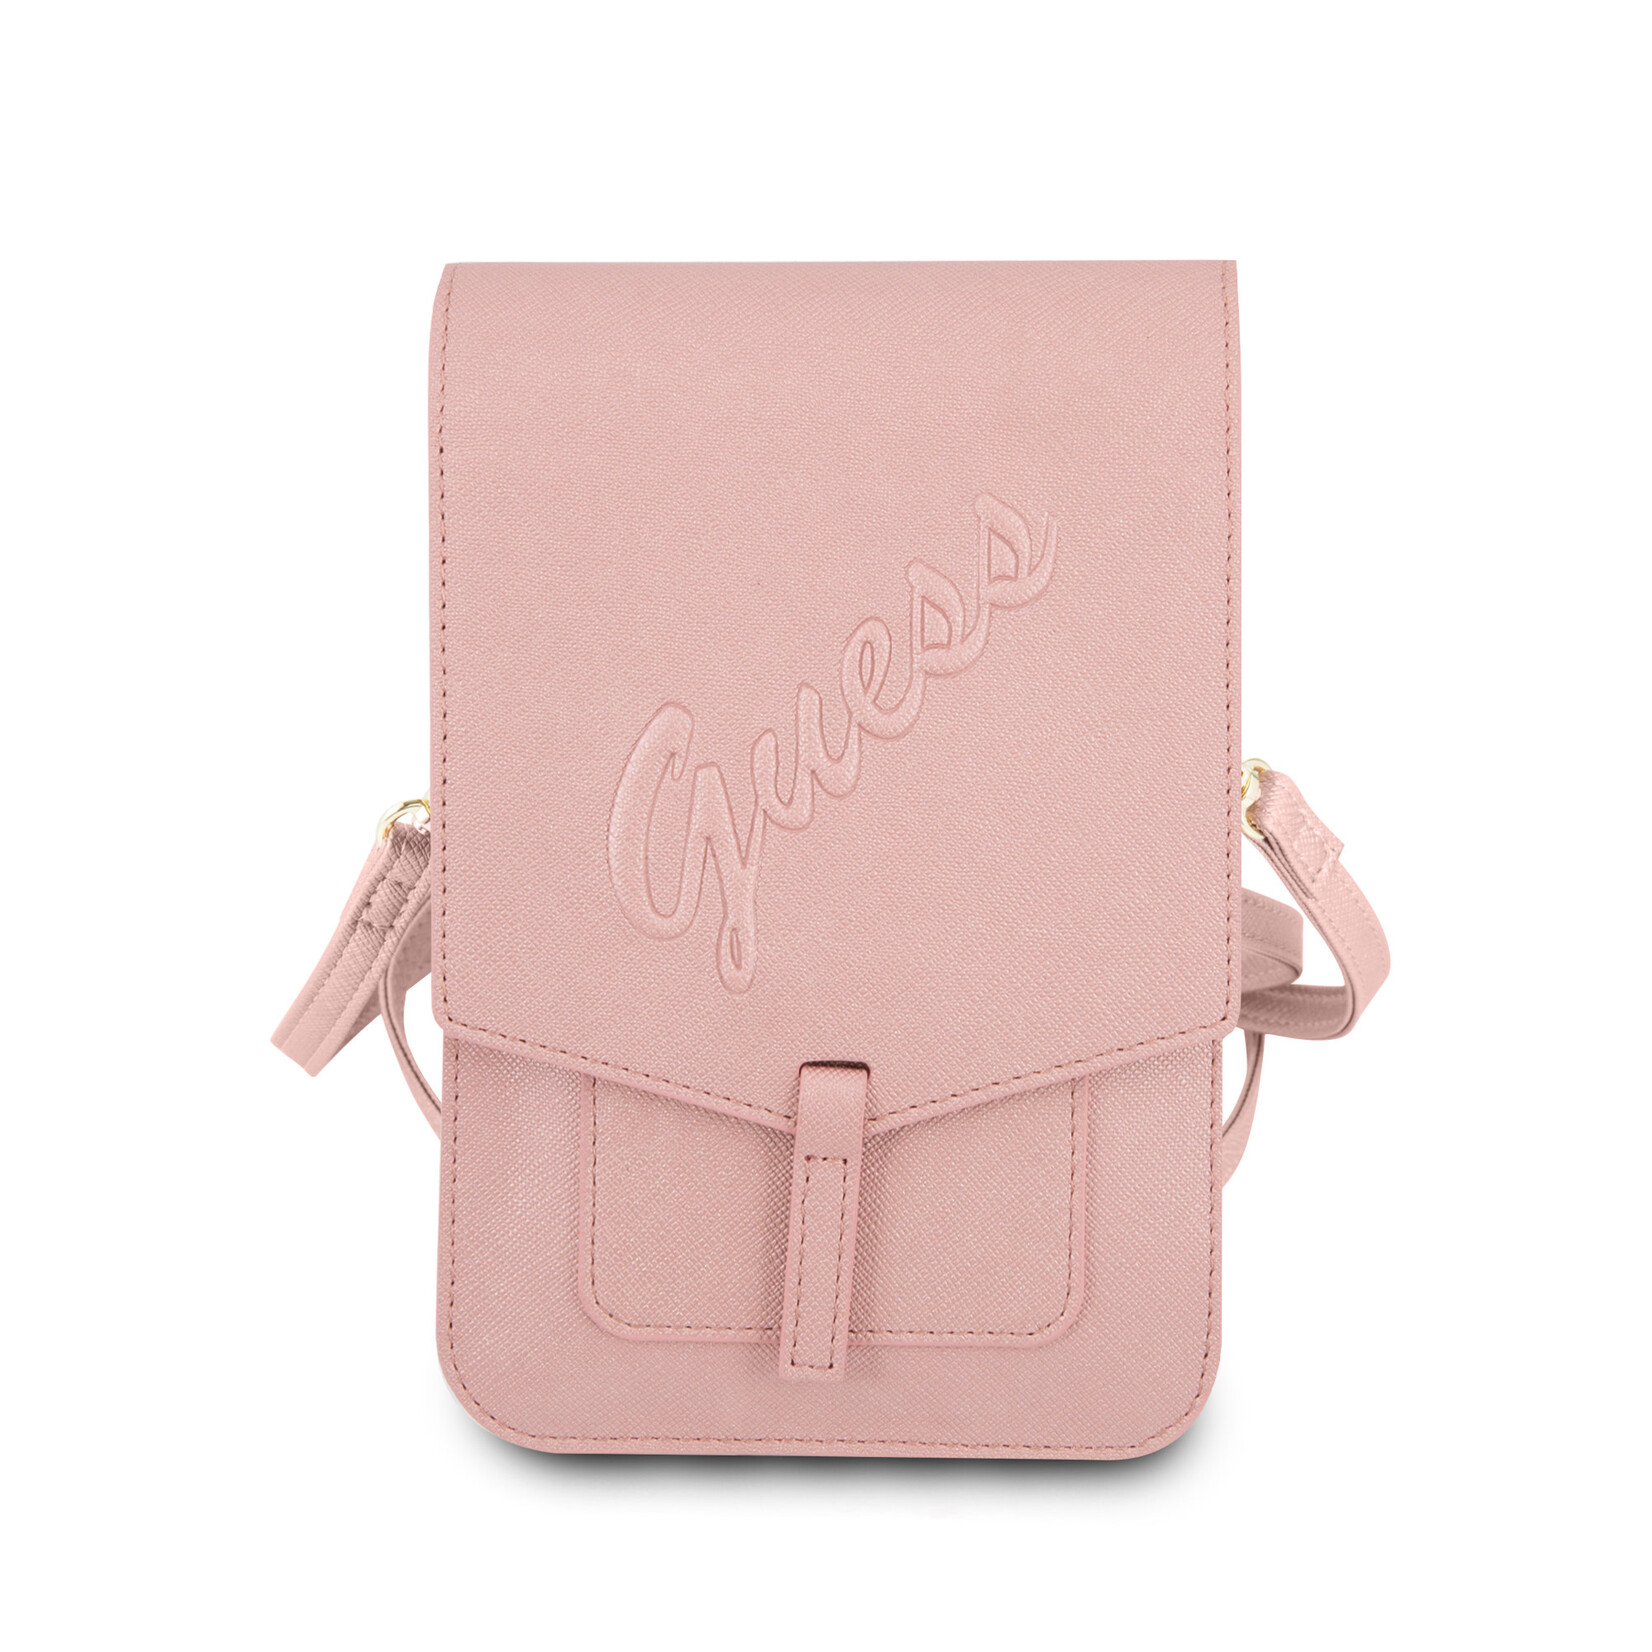 Guess Guess 7 inch Telefoontas - Wallet Bag - Roze - Saffiano Leather